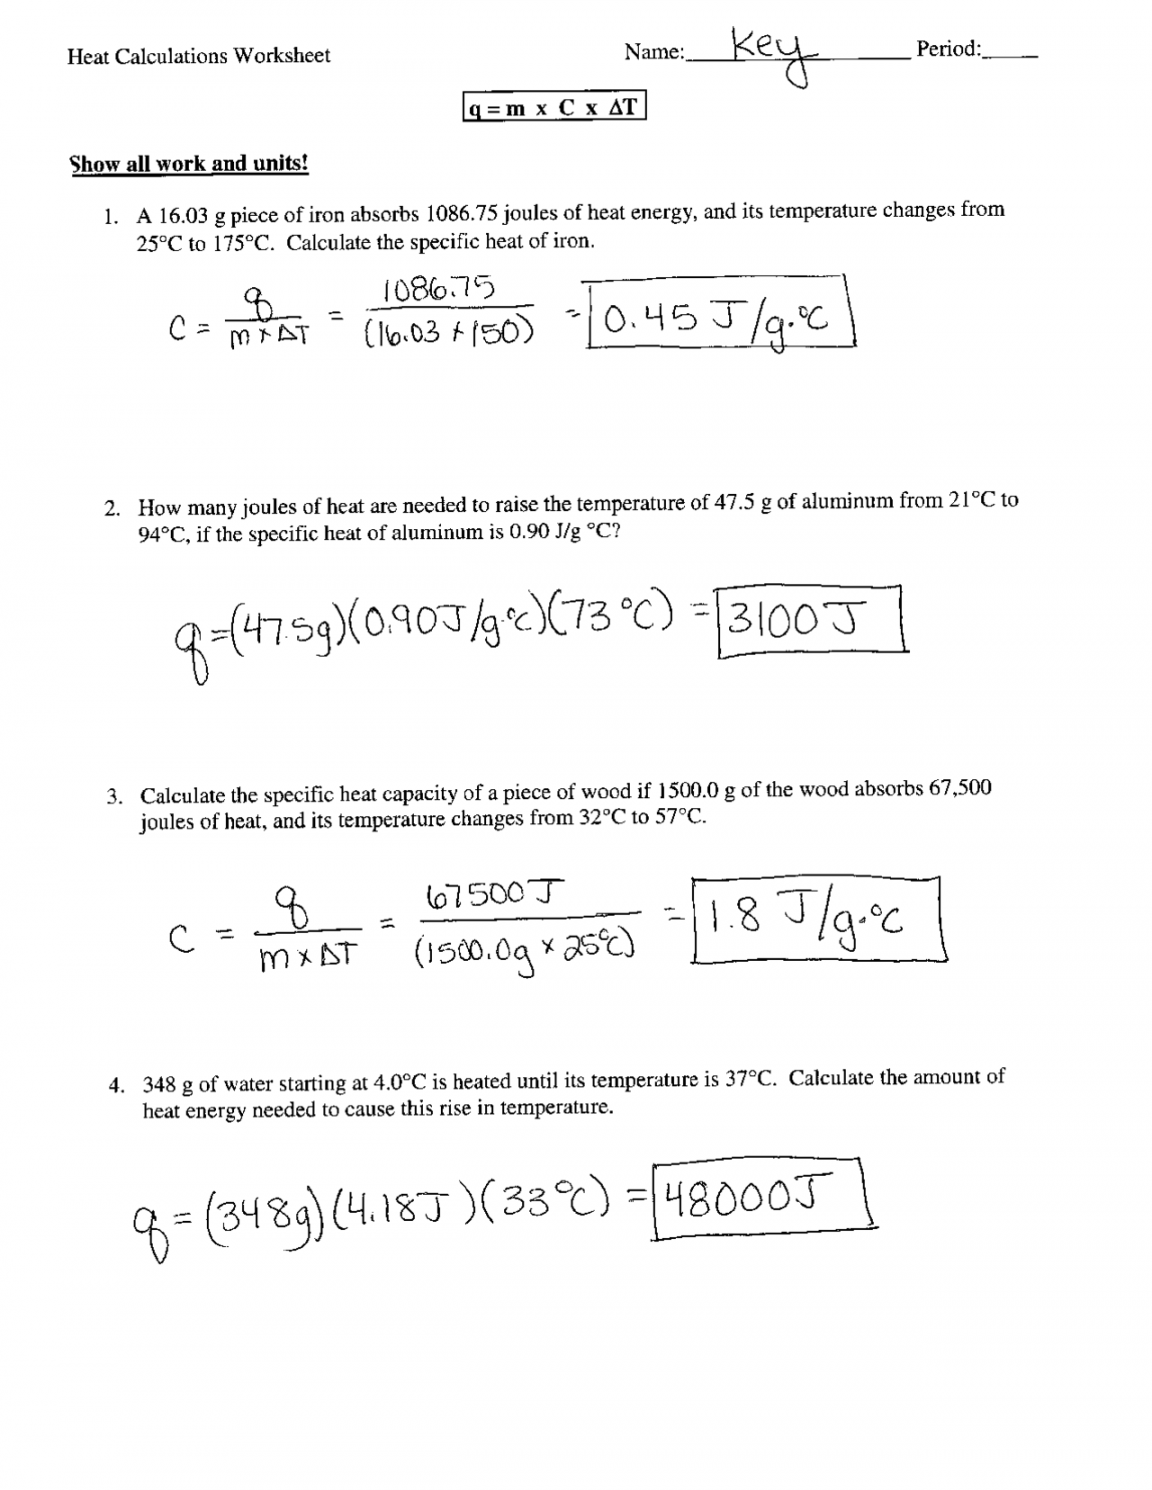 Heat Calculations Worksheet with Solutions  Exercises